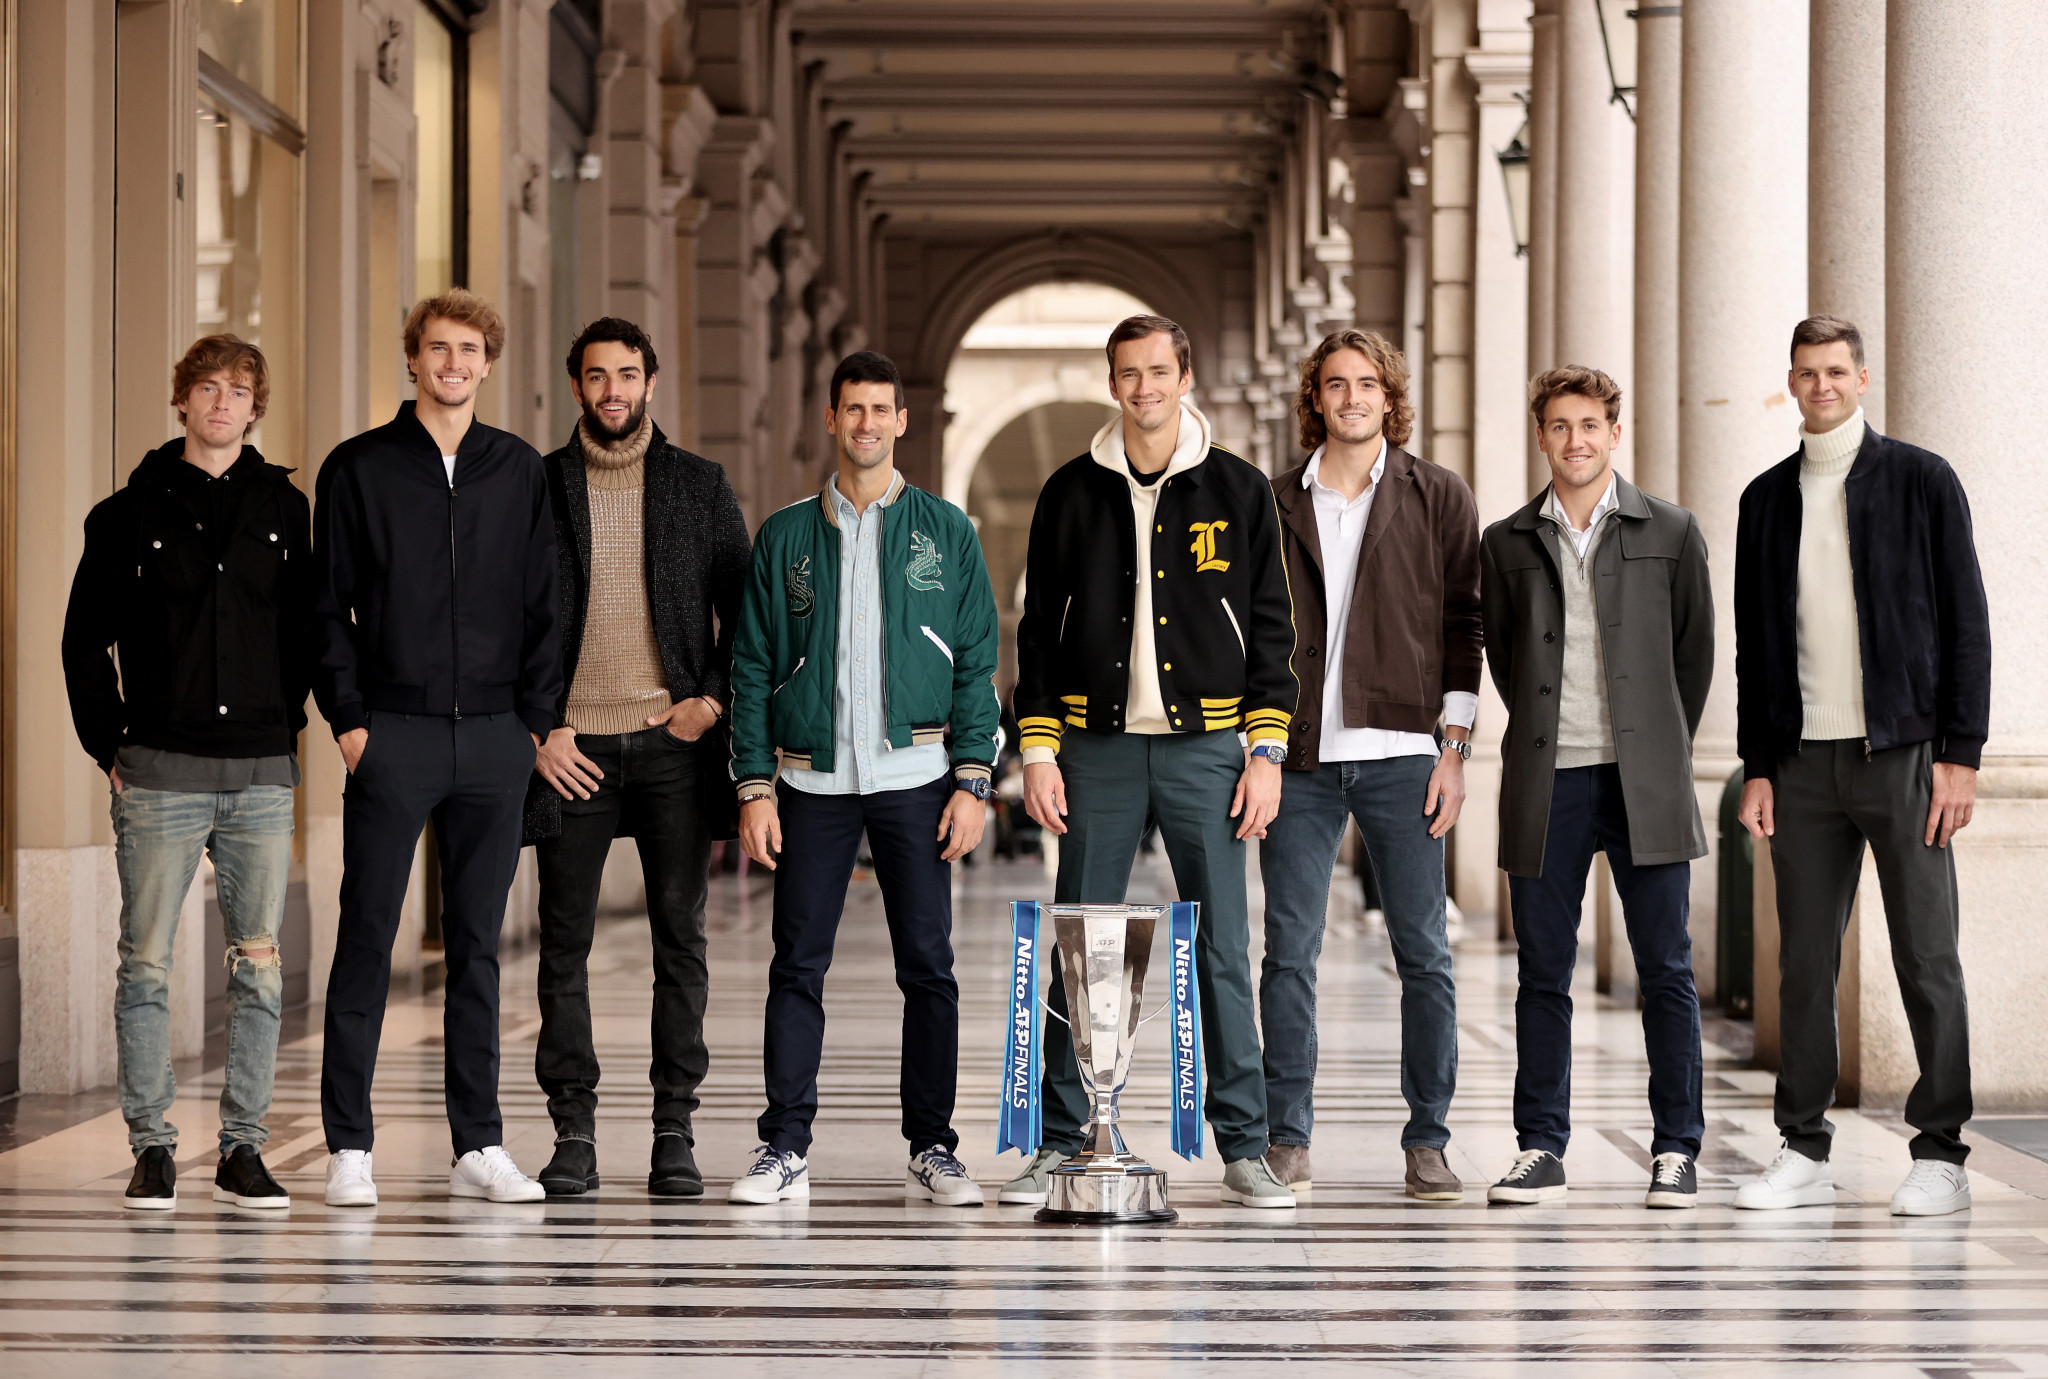 Daniil Medvedev, fourth from right, is the reigning ATP Finals champion ©Getty Images